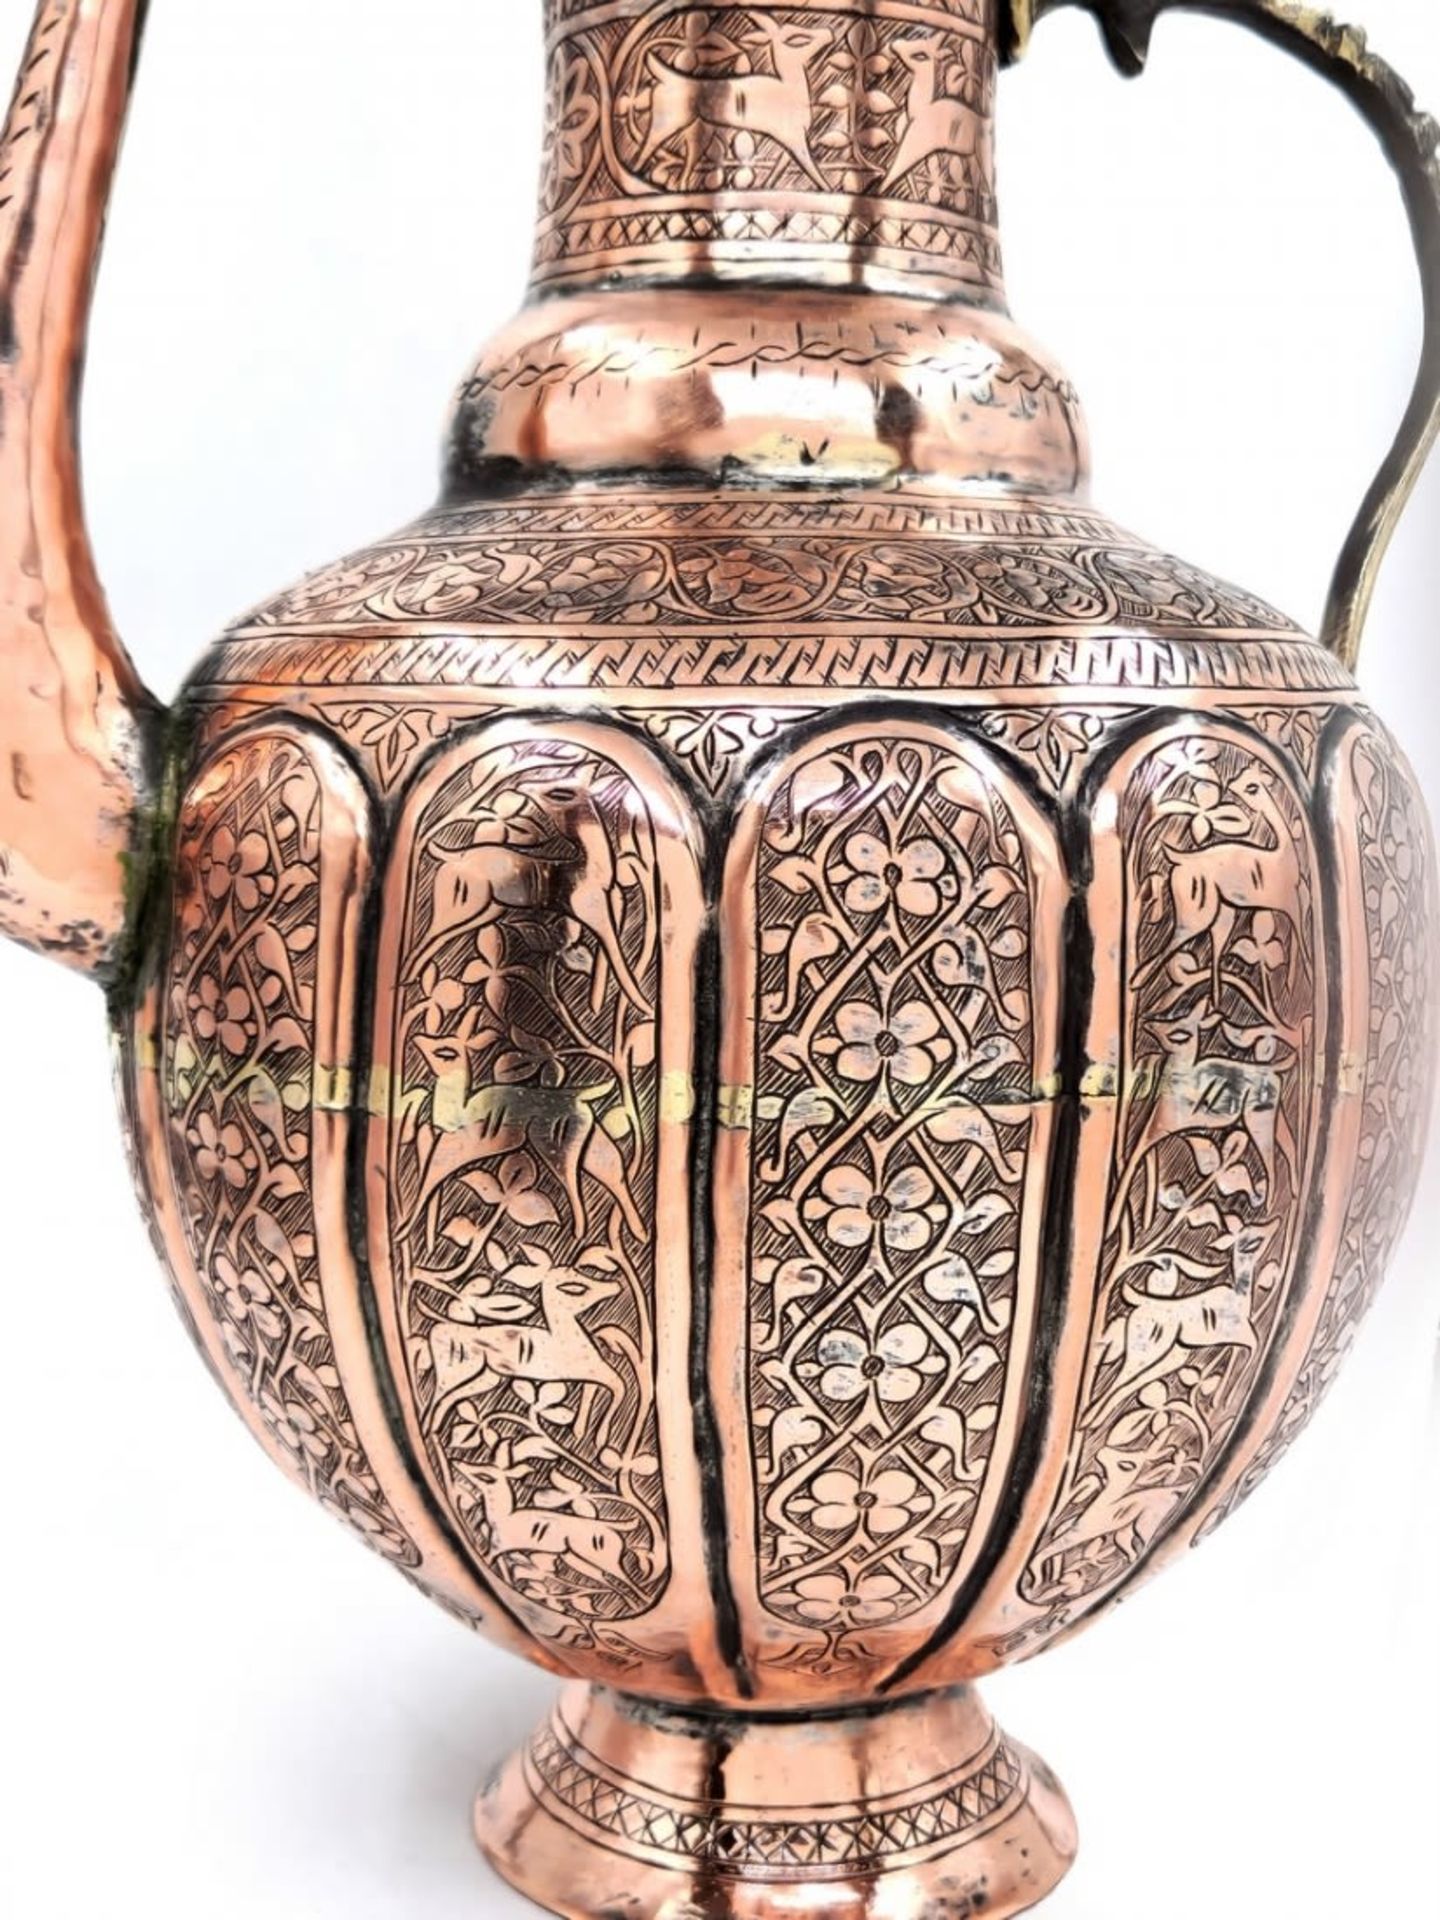 An antique Persian vessel, from the Qajar Dynasty period, made of copper and brass and decorated - Image 8 of 9